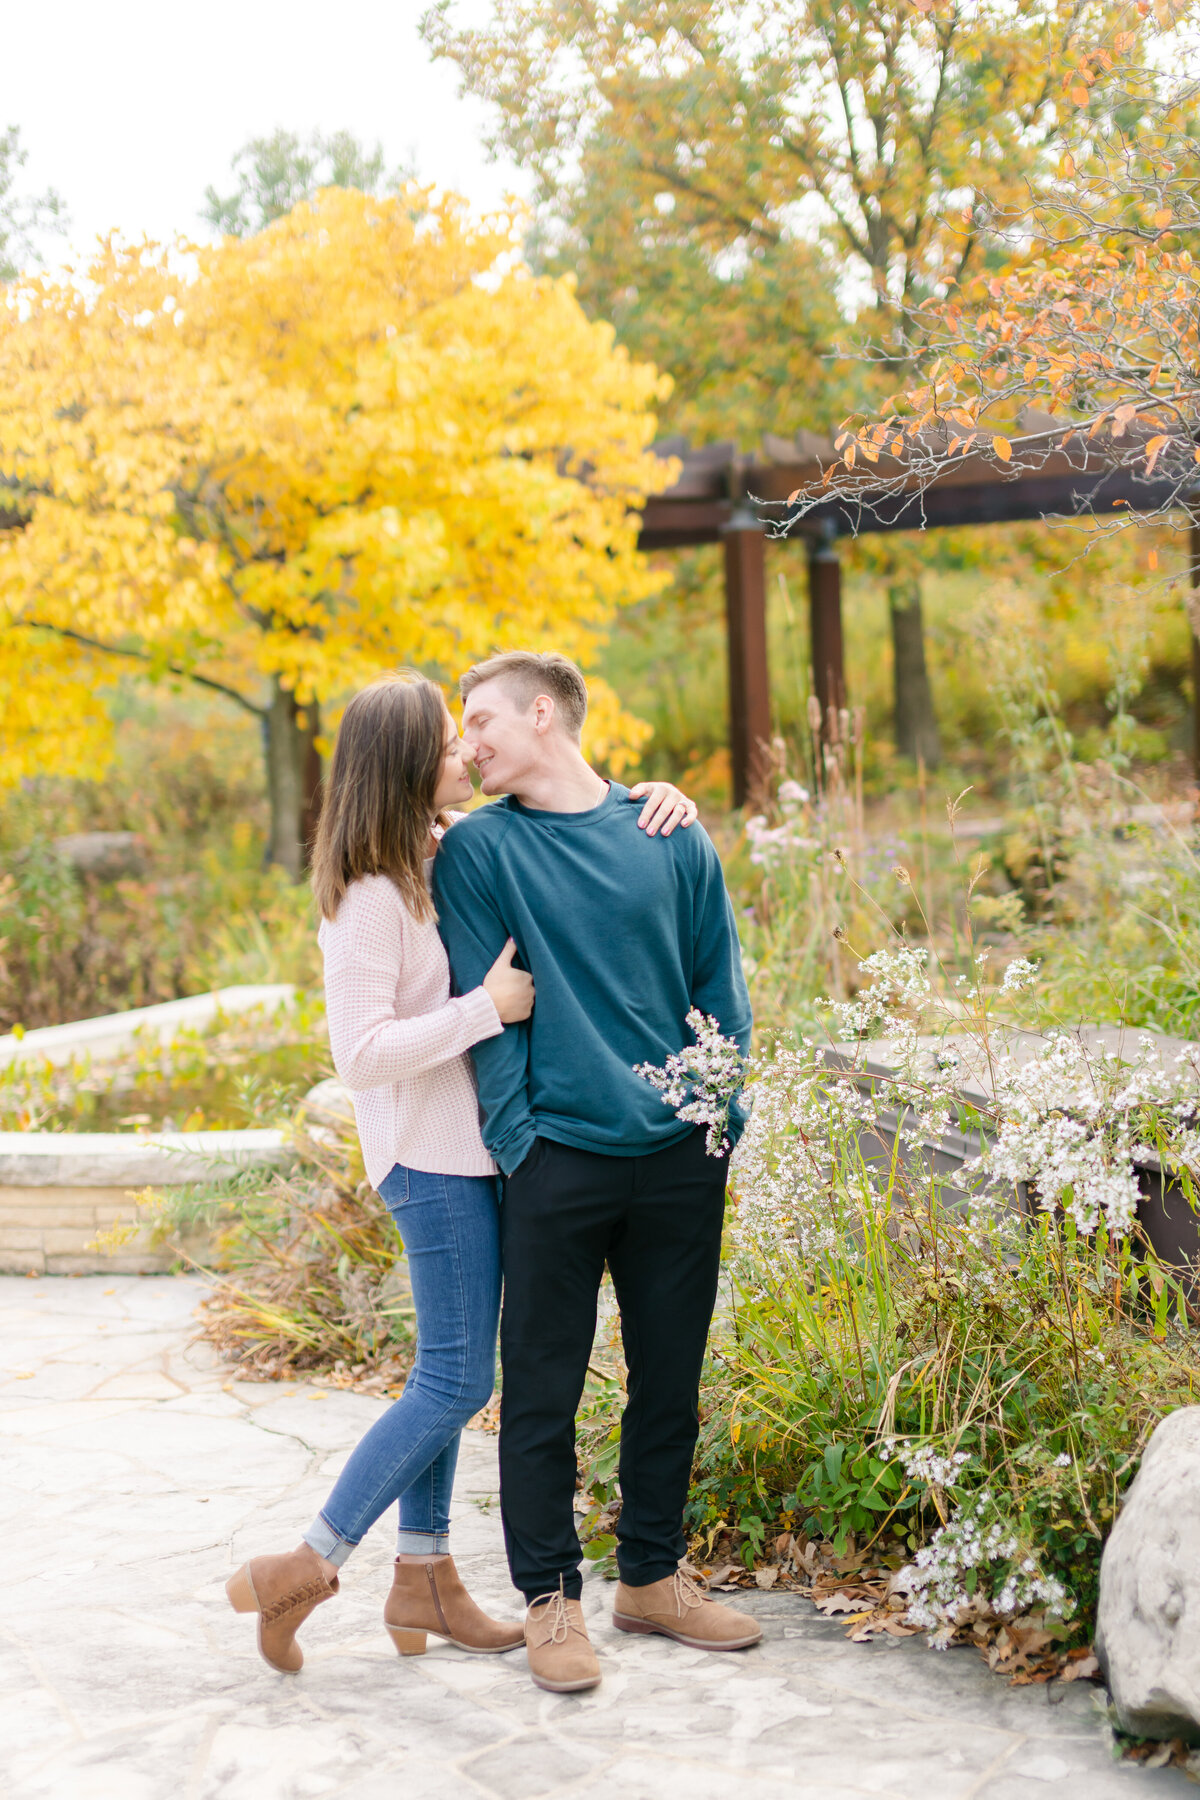 Engagement Session in Beautiful Independance Grove Forest Preserve, Libertyville, IL Maira Ochoa Photography-15